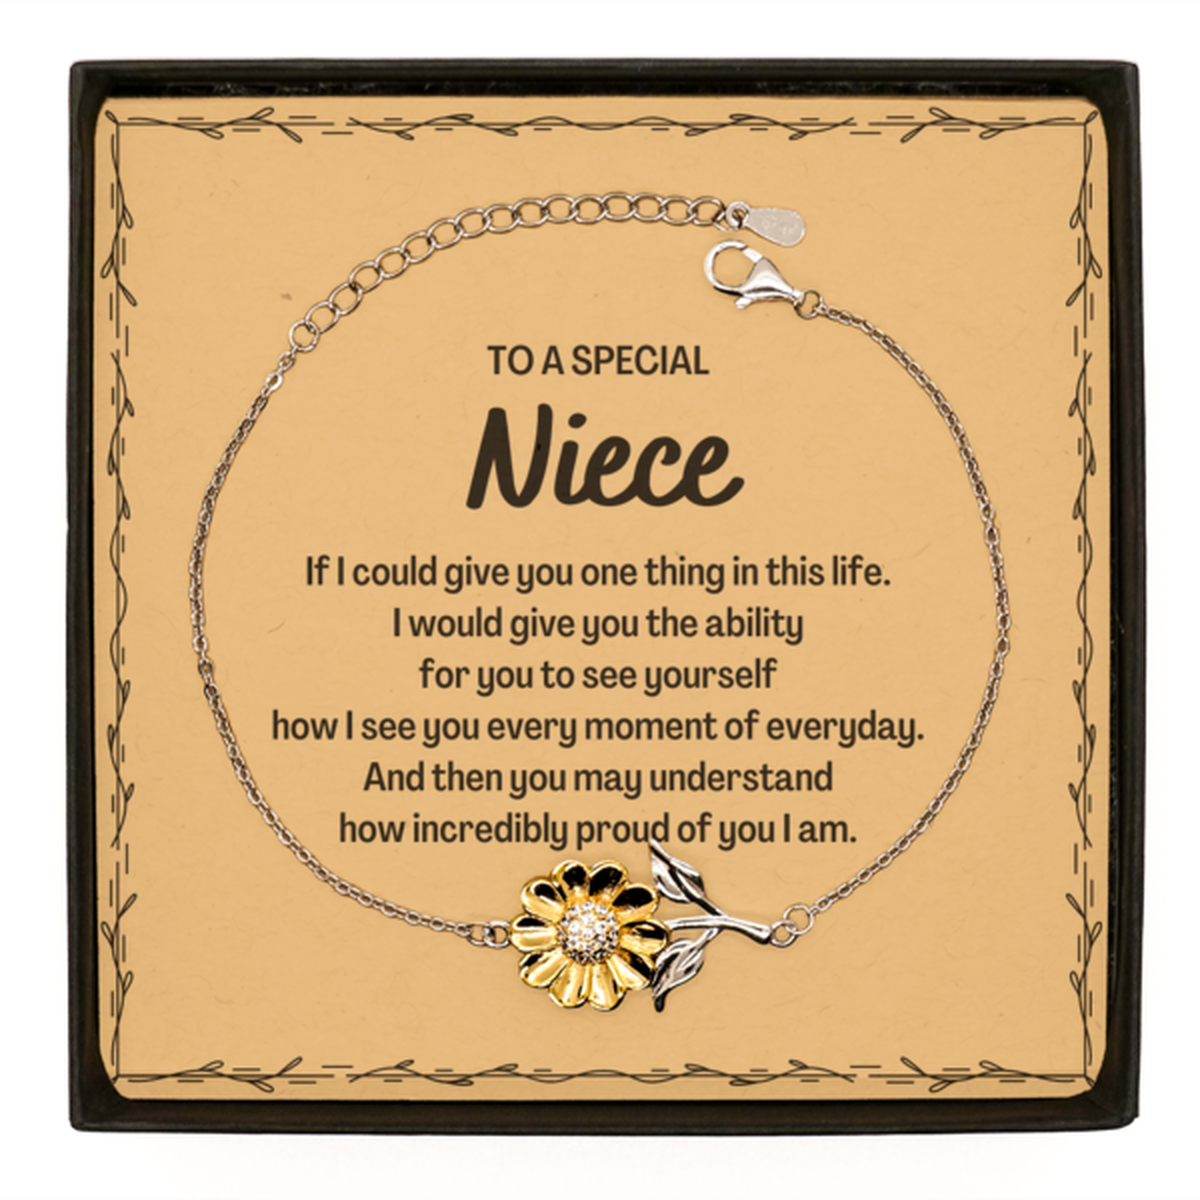 To My Niece Sunflower Bracelet, Gifts For Niece Message Card, Inspirational Gifts for Christmas Birthday, Epic Gifts for Niece To A Special Niece how incredibly proud of you I am